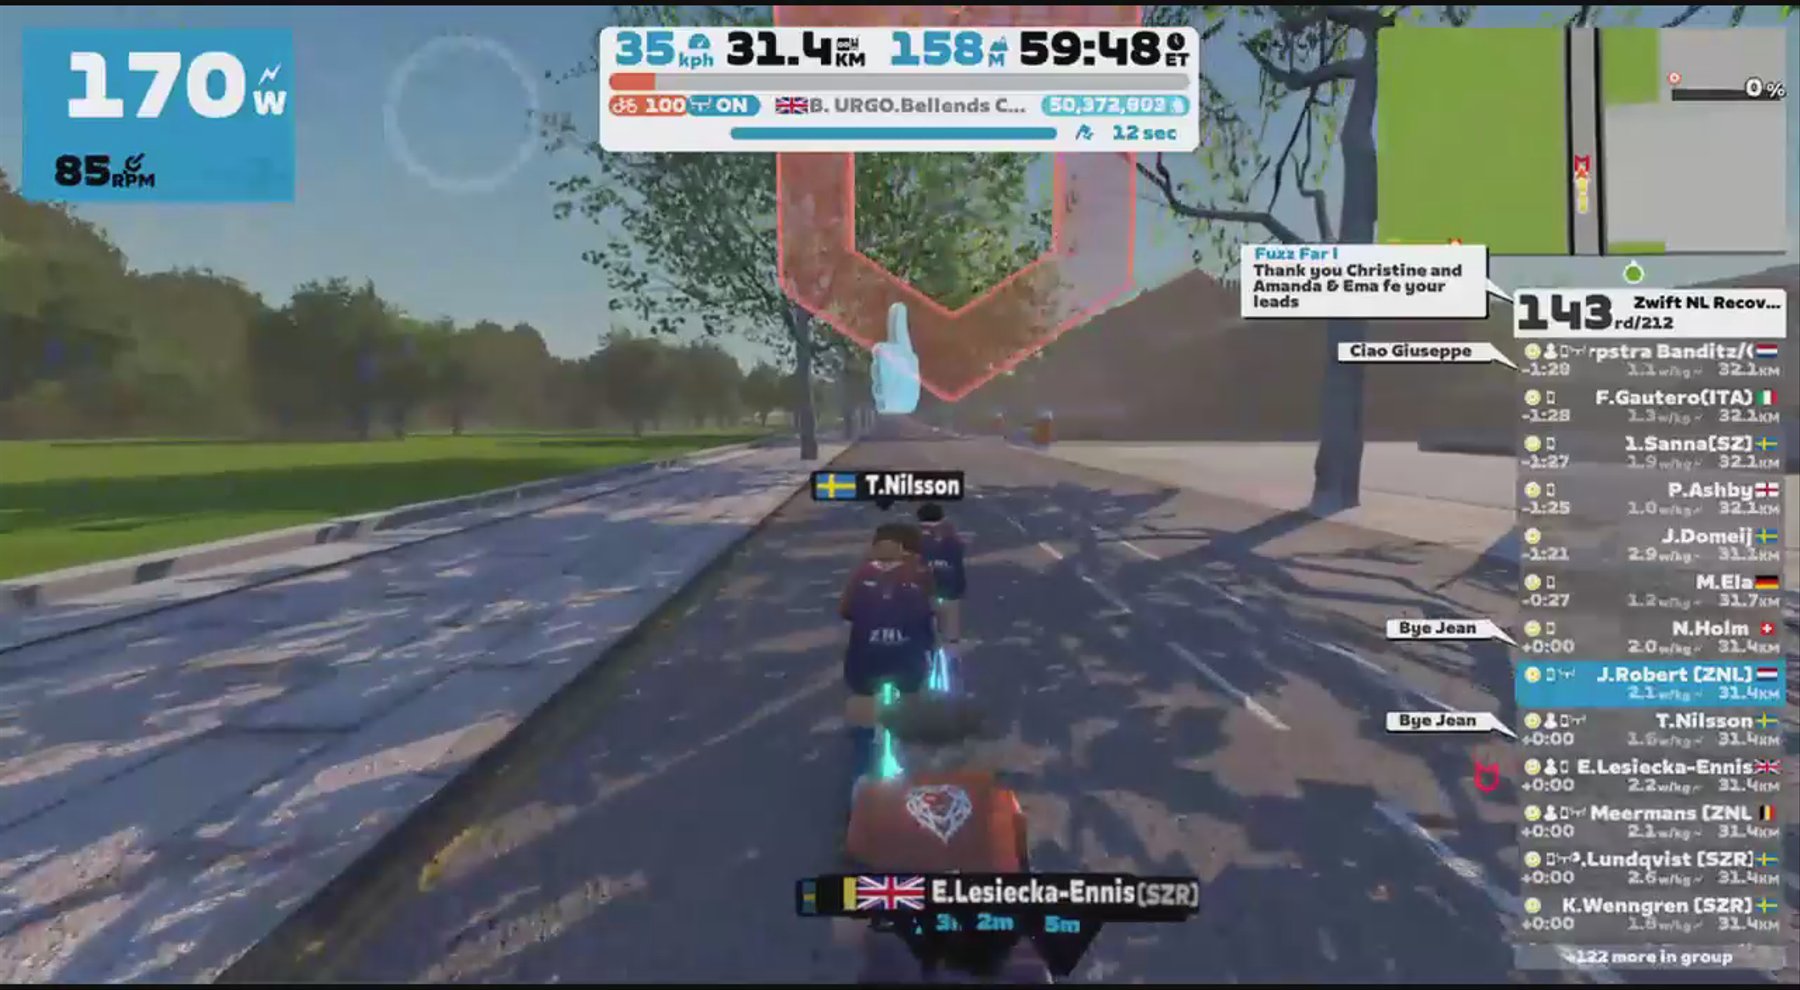 Zwift - Group Ride: Zwift NL Recovery Ride (D) on Greater London Flat in London